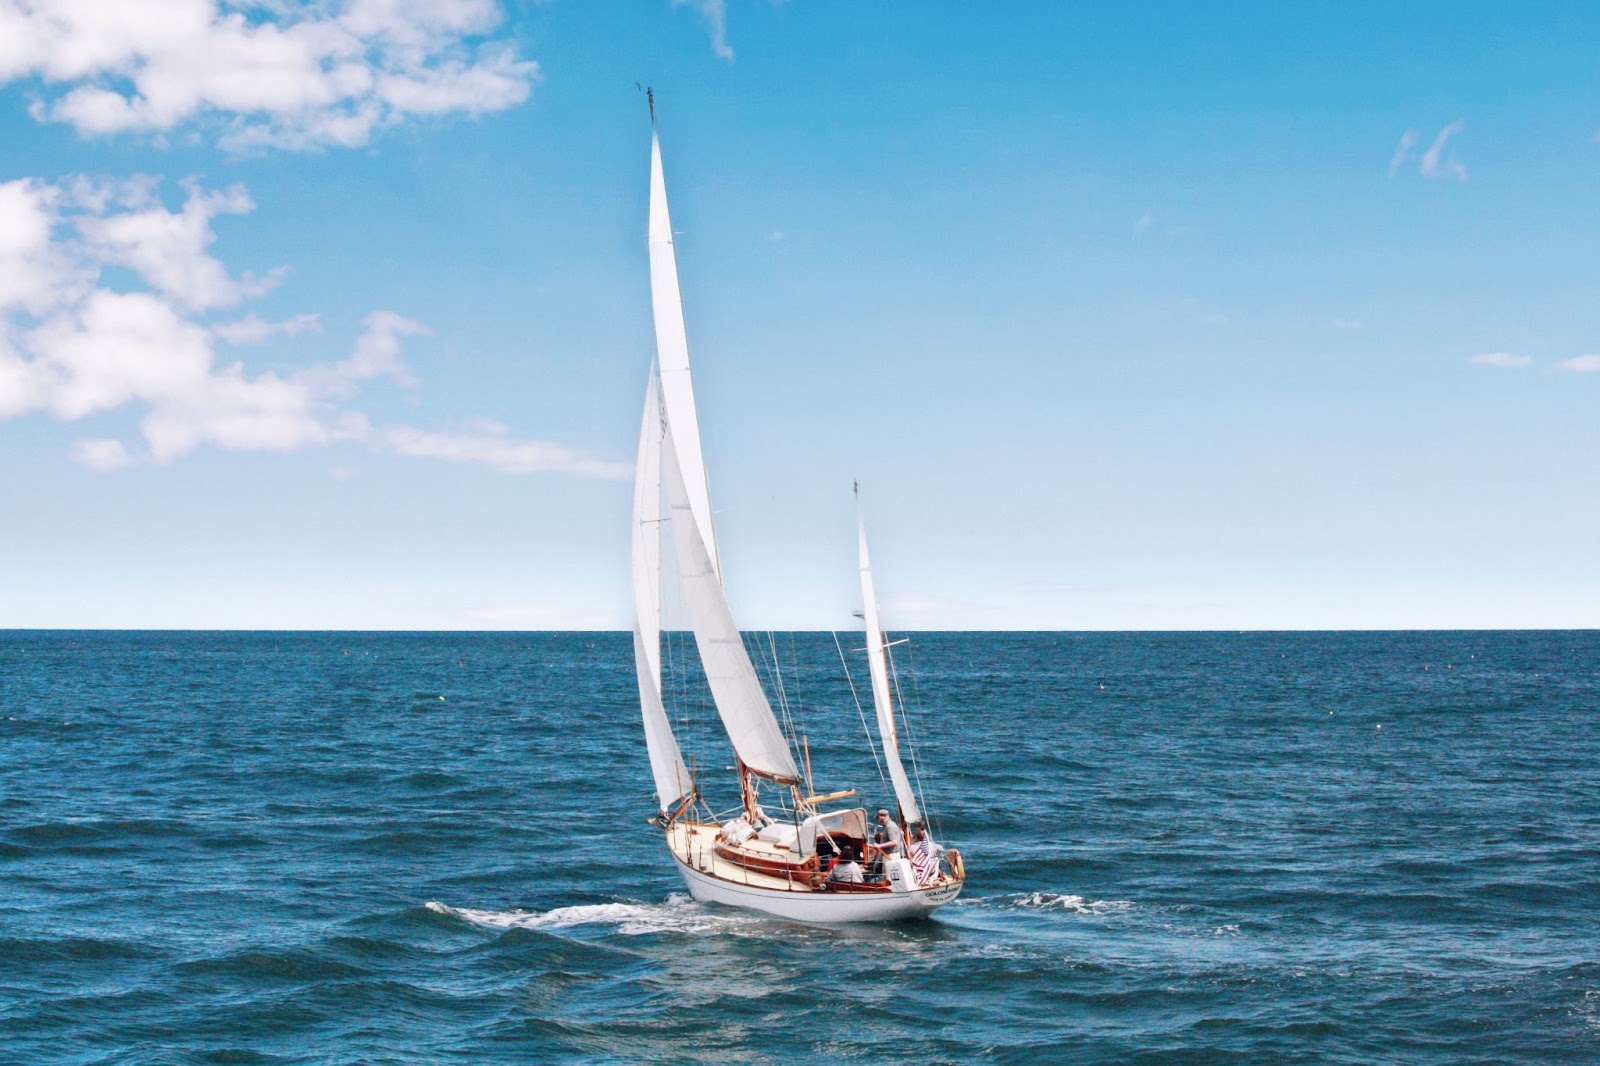 Renting a sailboat to live on